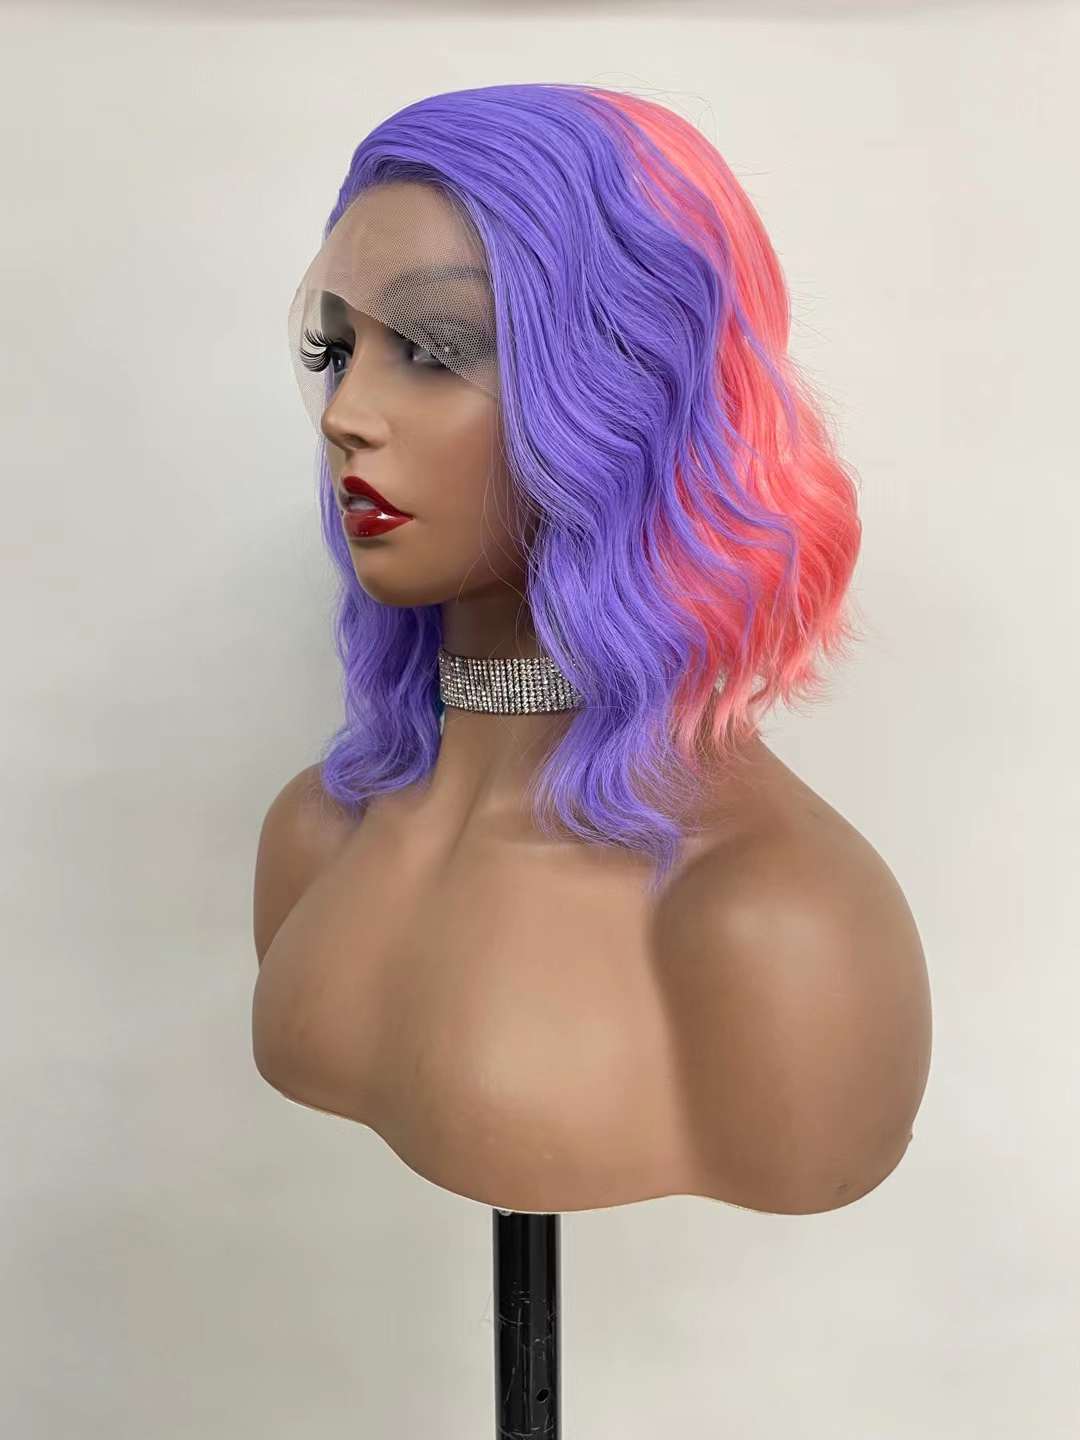 Colorful Medium Length body wave Wigs Natural Hair Wig